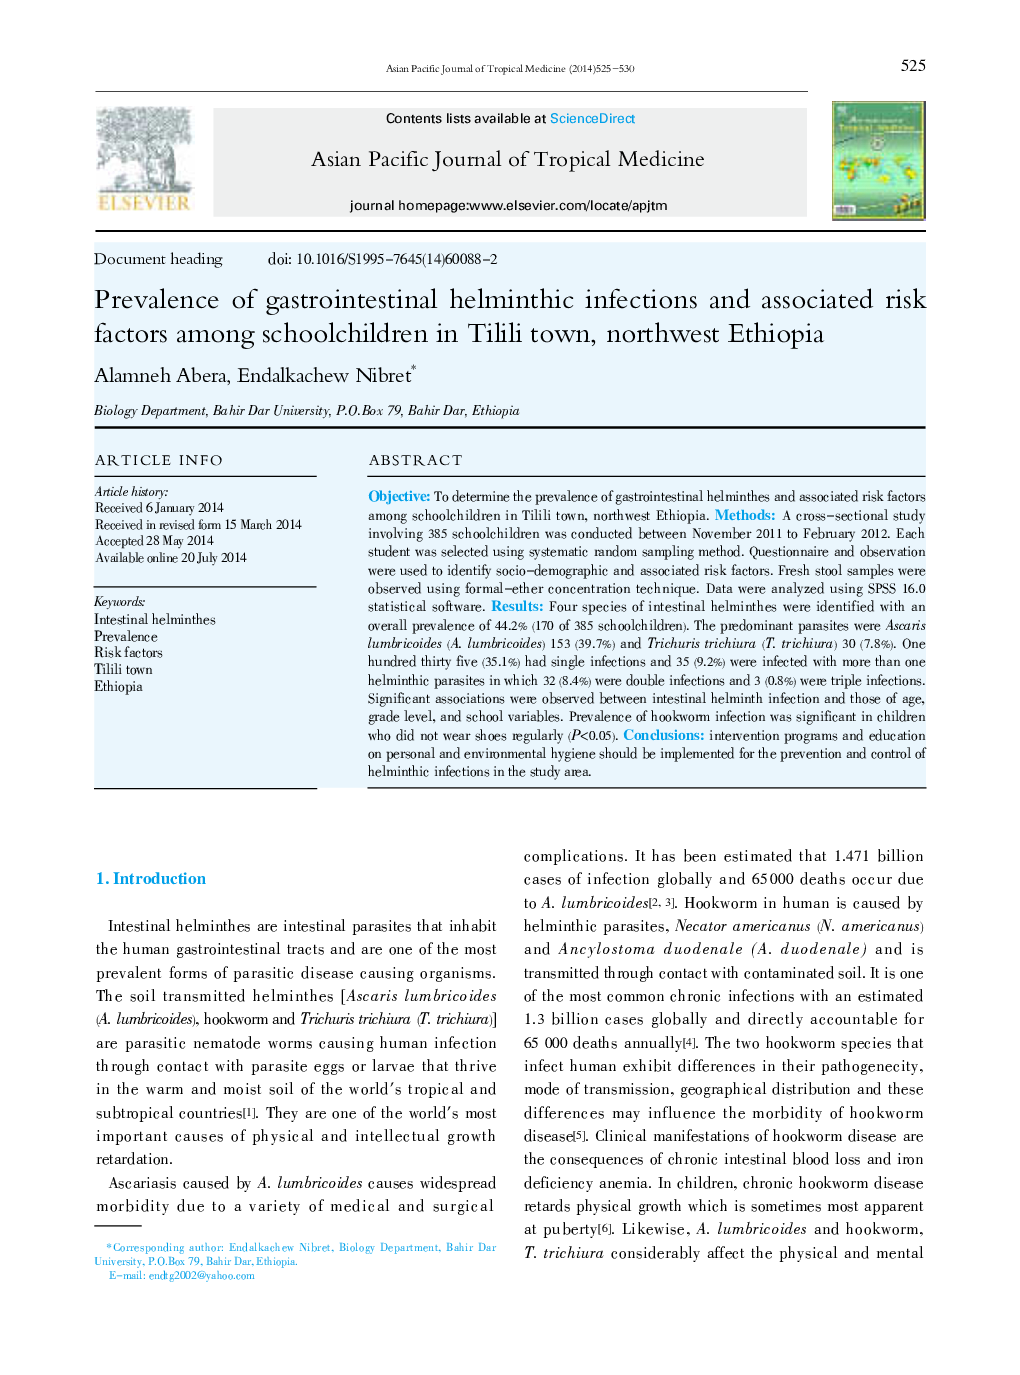 Prevalence of gastrointestinal helminthic infections and associated risk factors among schoolchildren in Tilili town, northwest Ethiopia 